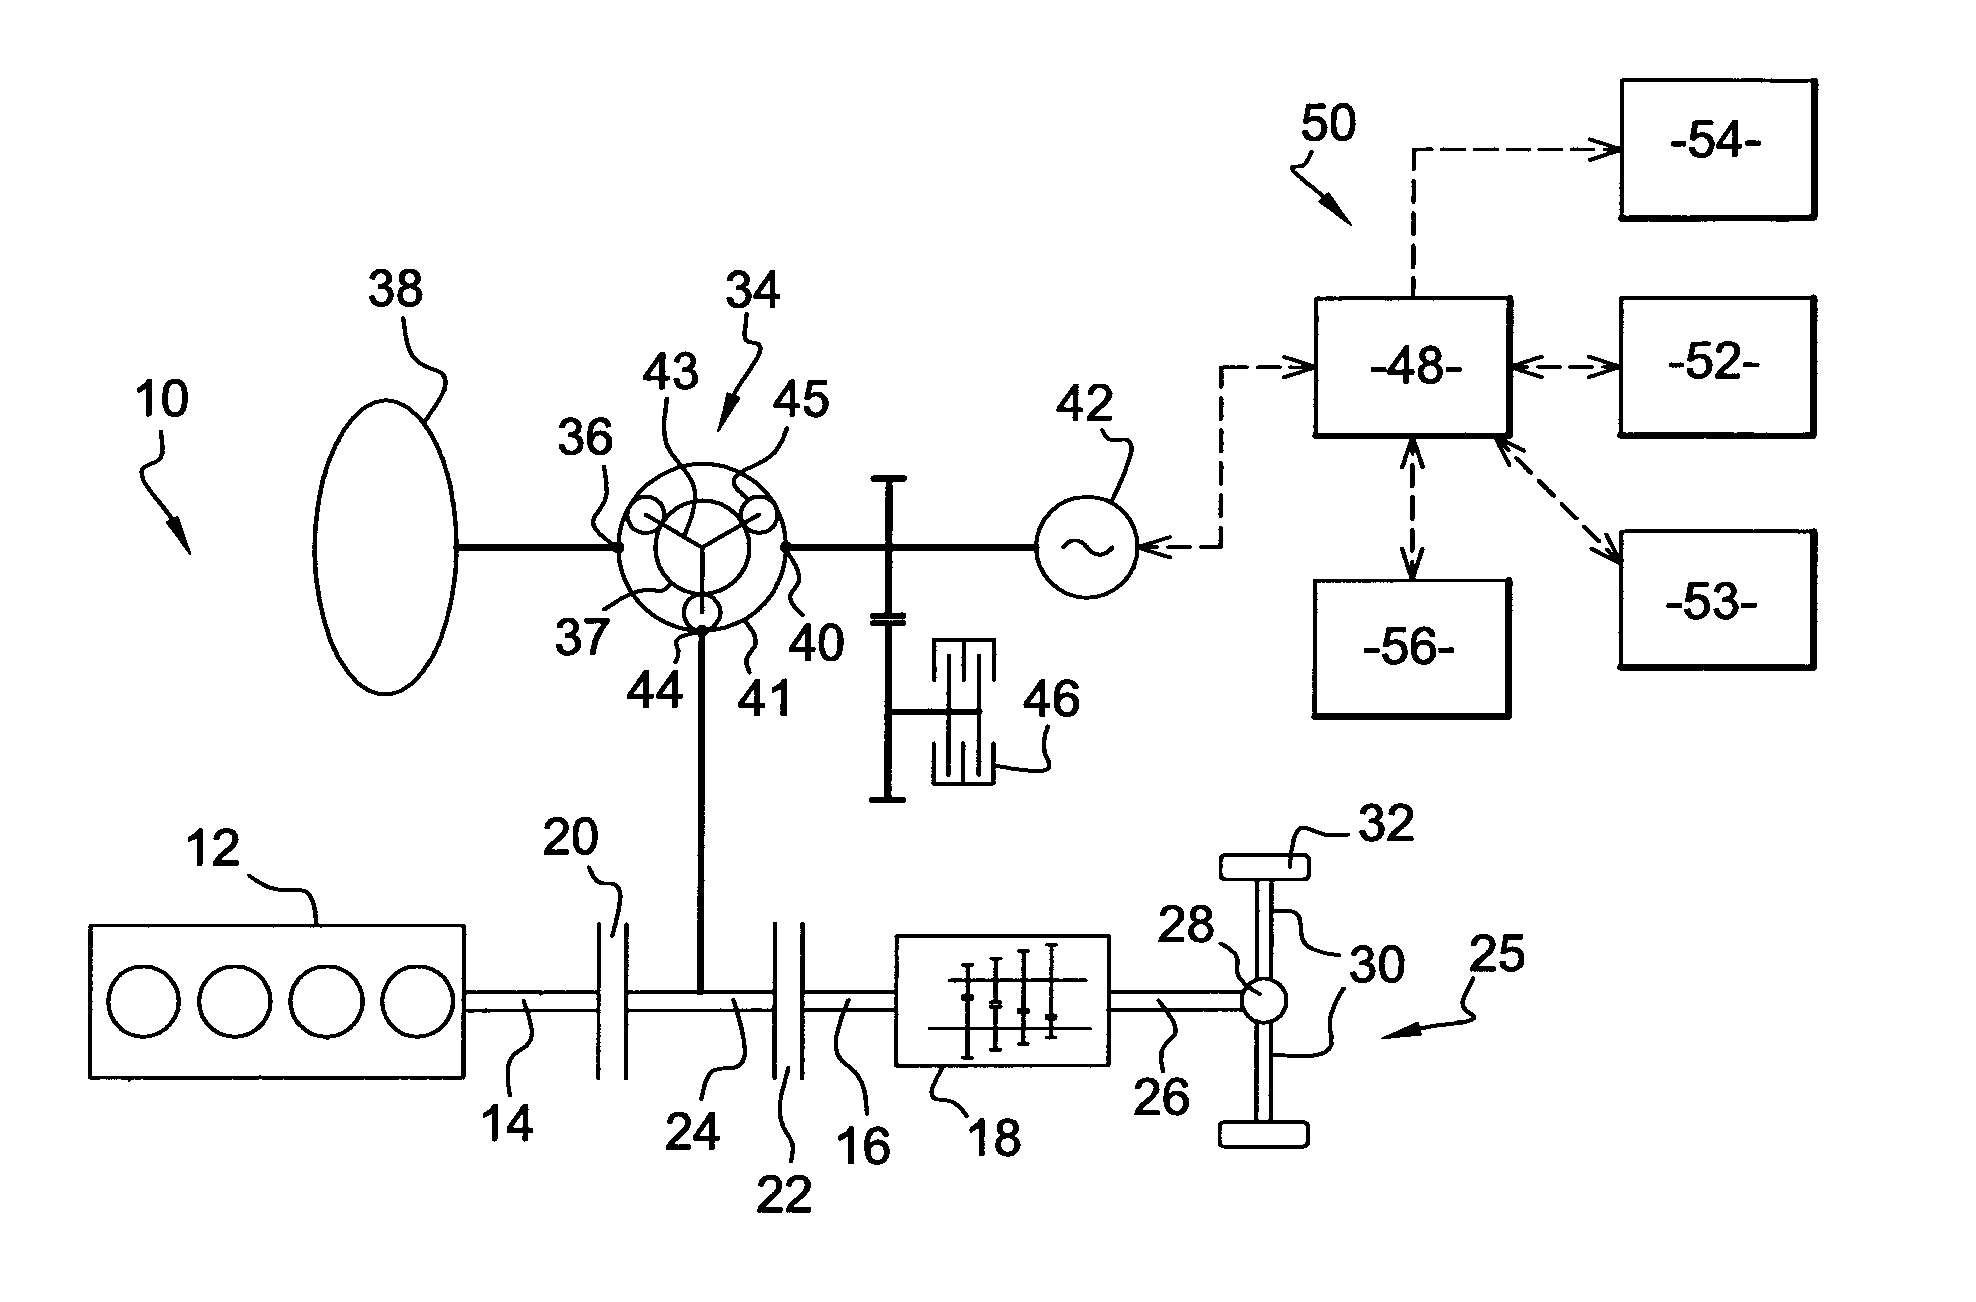 Powertrain comprising an optimized energy recovery system